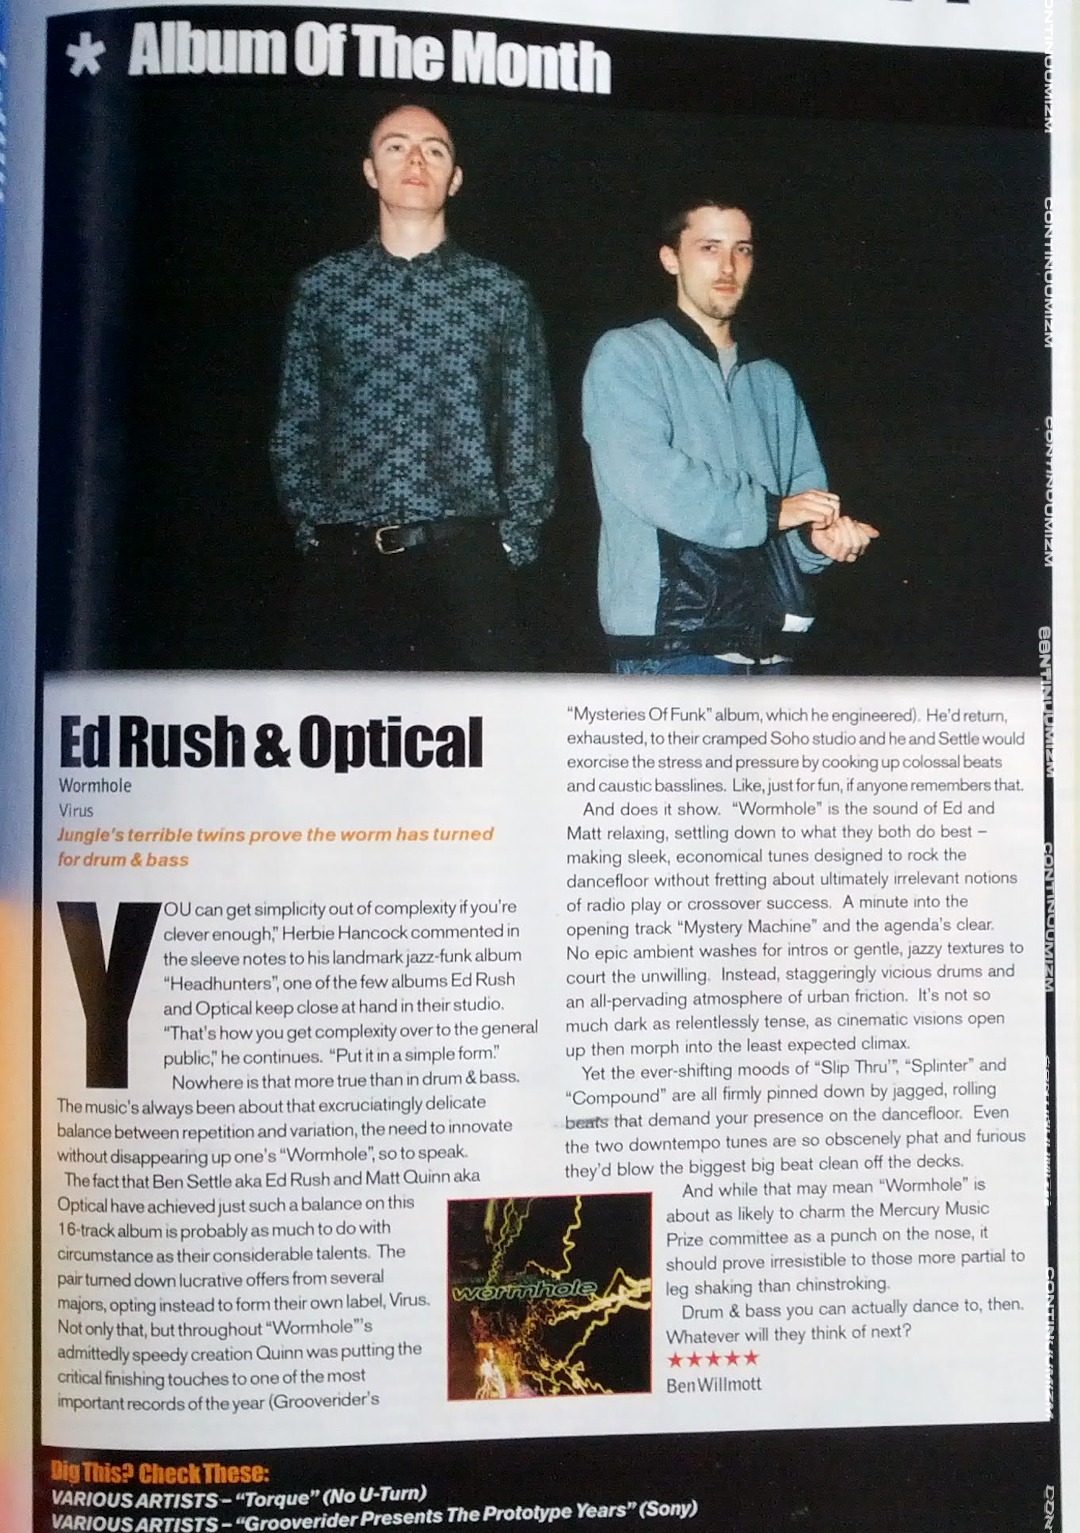 Ed Rush & Optical's Wormhole reviewed and Album of the Month notice in Muzik Magazine, December 1998. 'Jungle's terrible twins prove the worm has turned for drum & bass'. Photo of magazine open to the page.